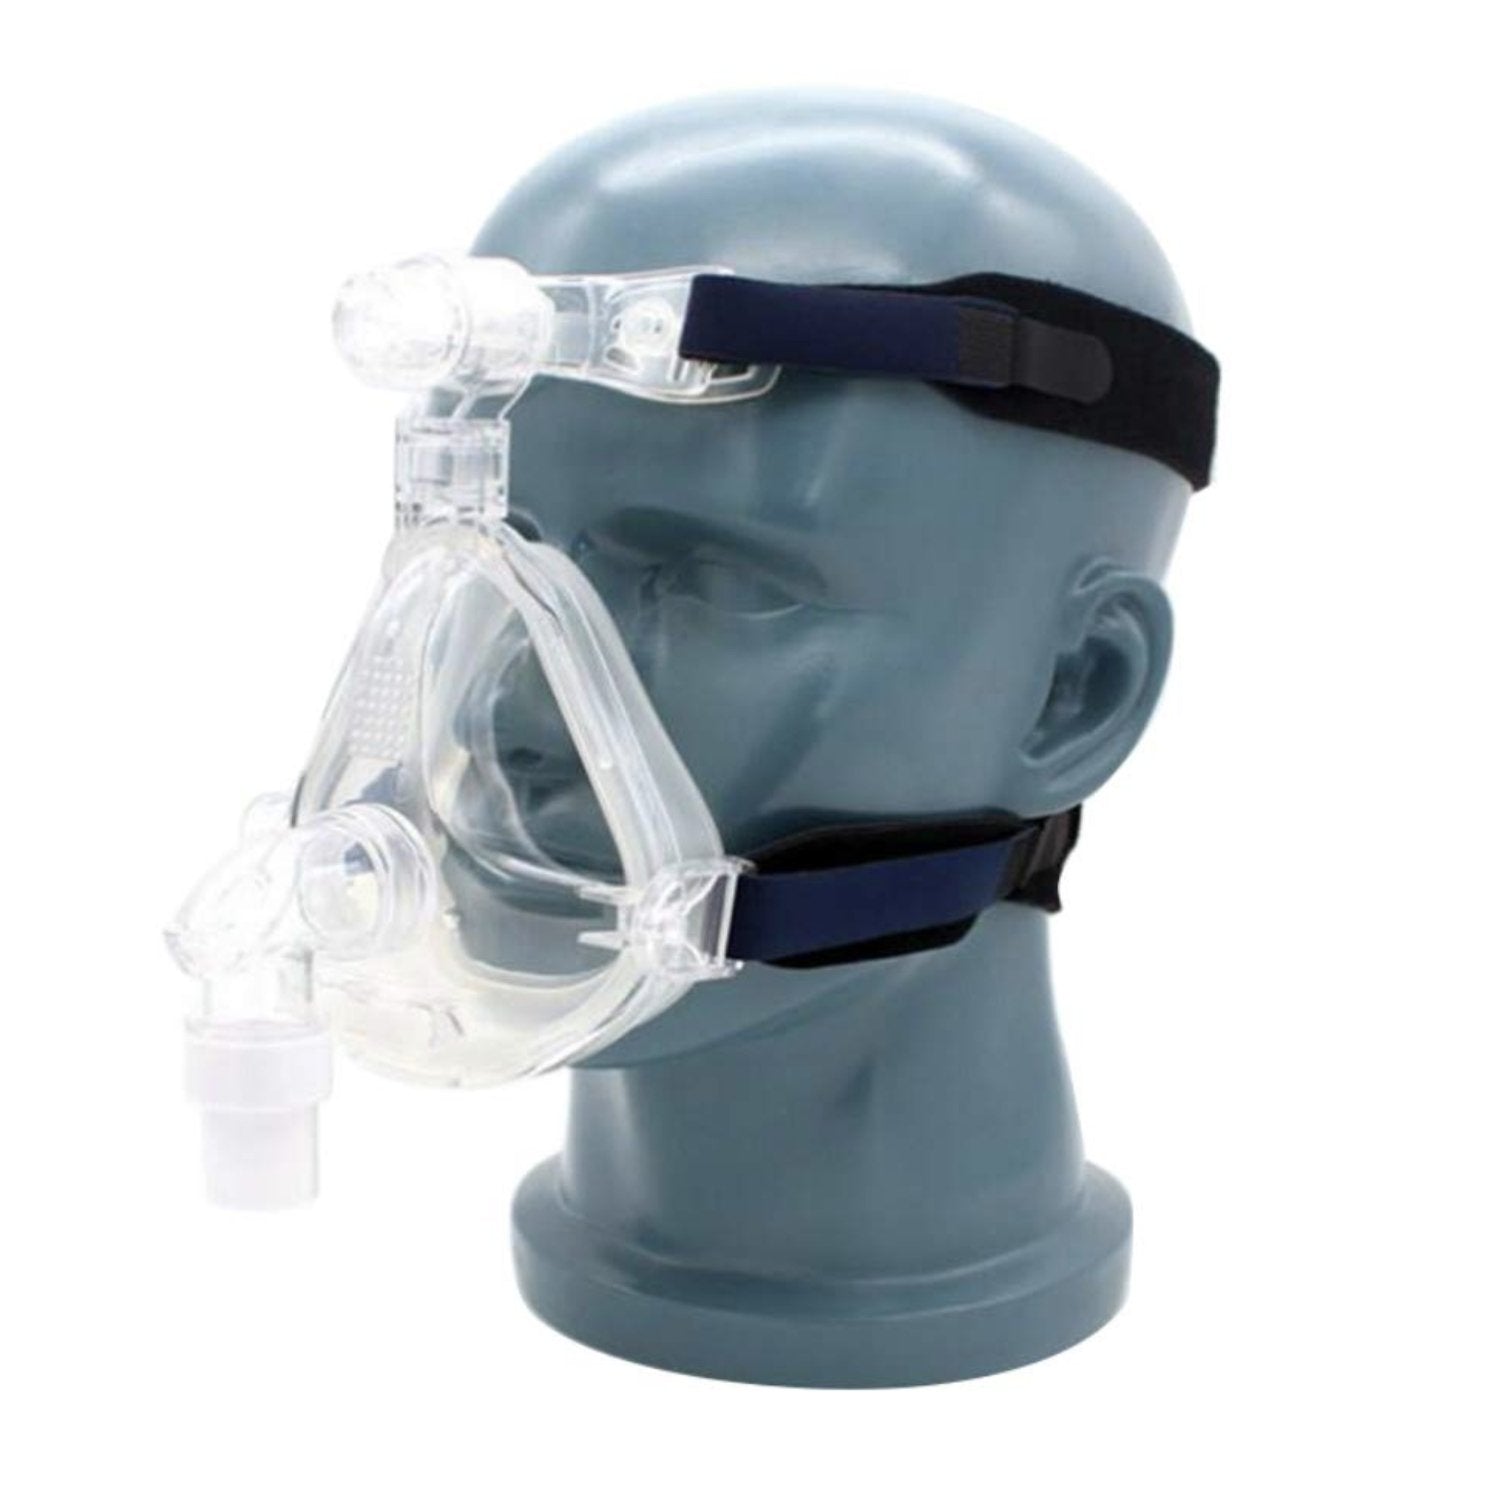 Universal BiPAP Masks and Accessories